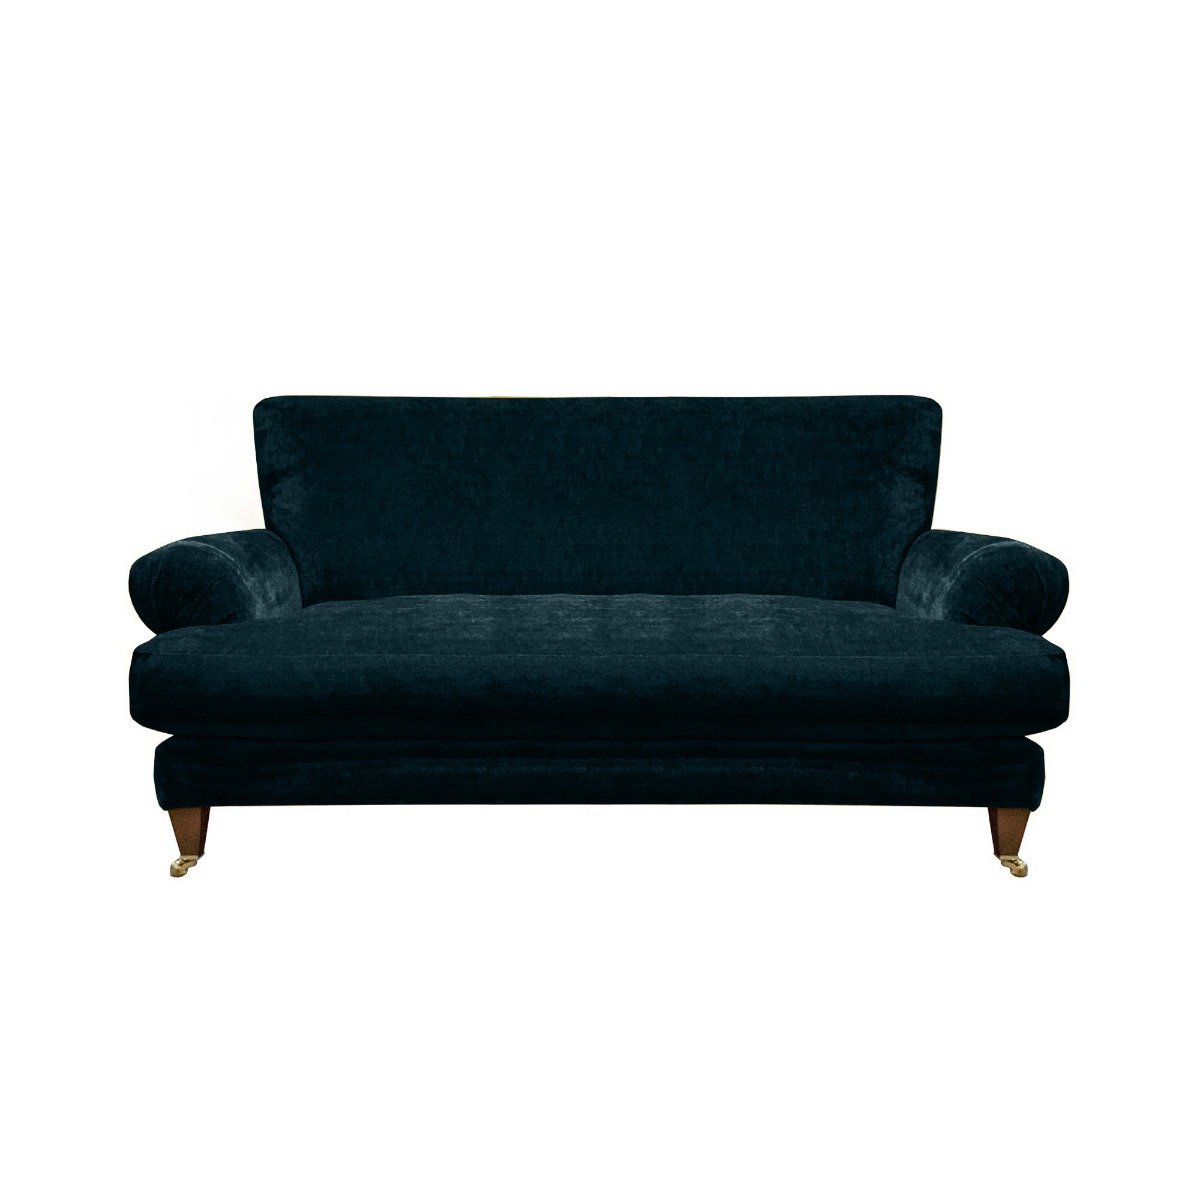 Durant 2 Seater Sofa, Teal Fabric | Barker & Stonehouse